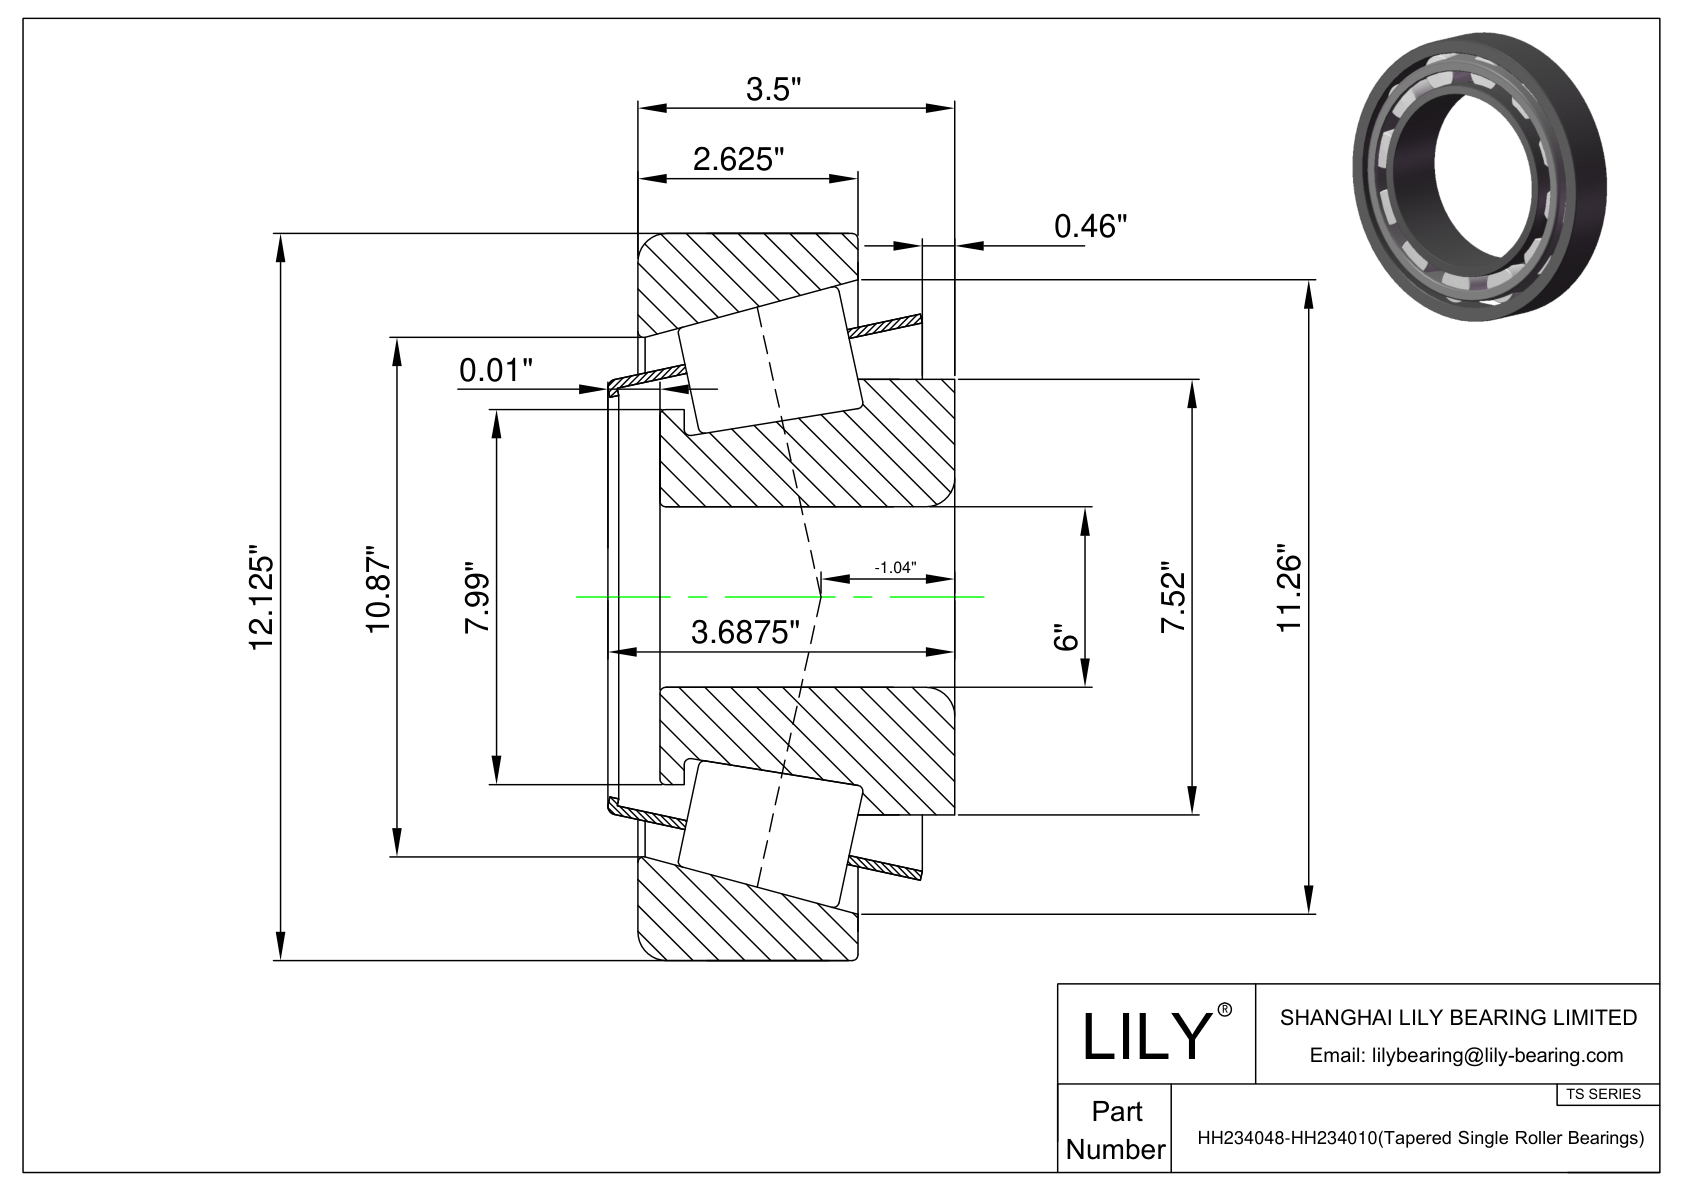 HH234048-HH234010 TS (Tapered Single Roller Bearings) (Imperial) cad drawing